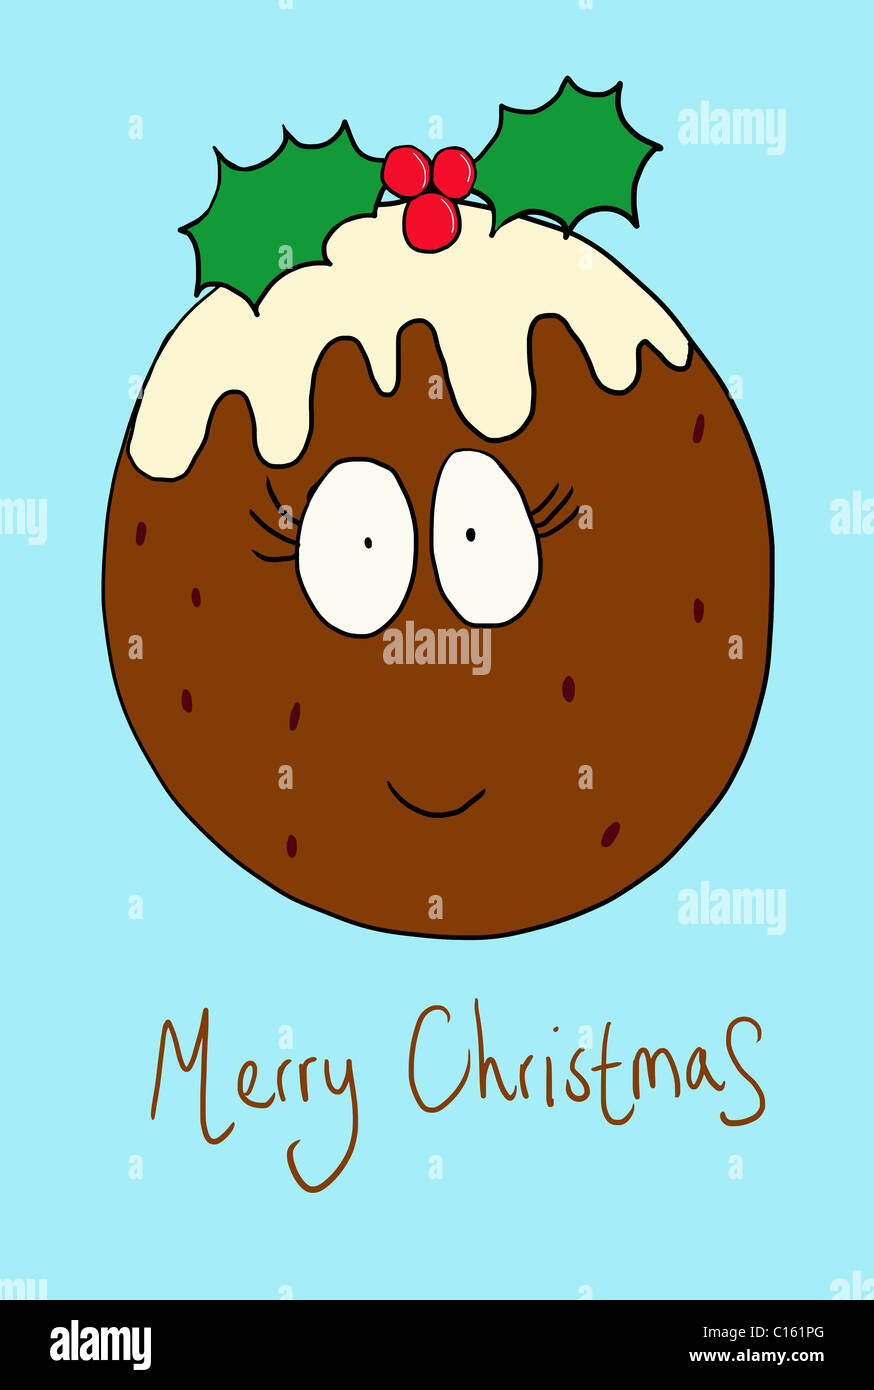 Christmas pudding with smiling face, illustration Stock Photo